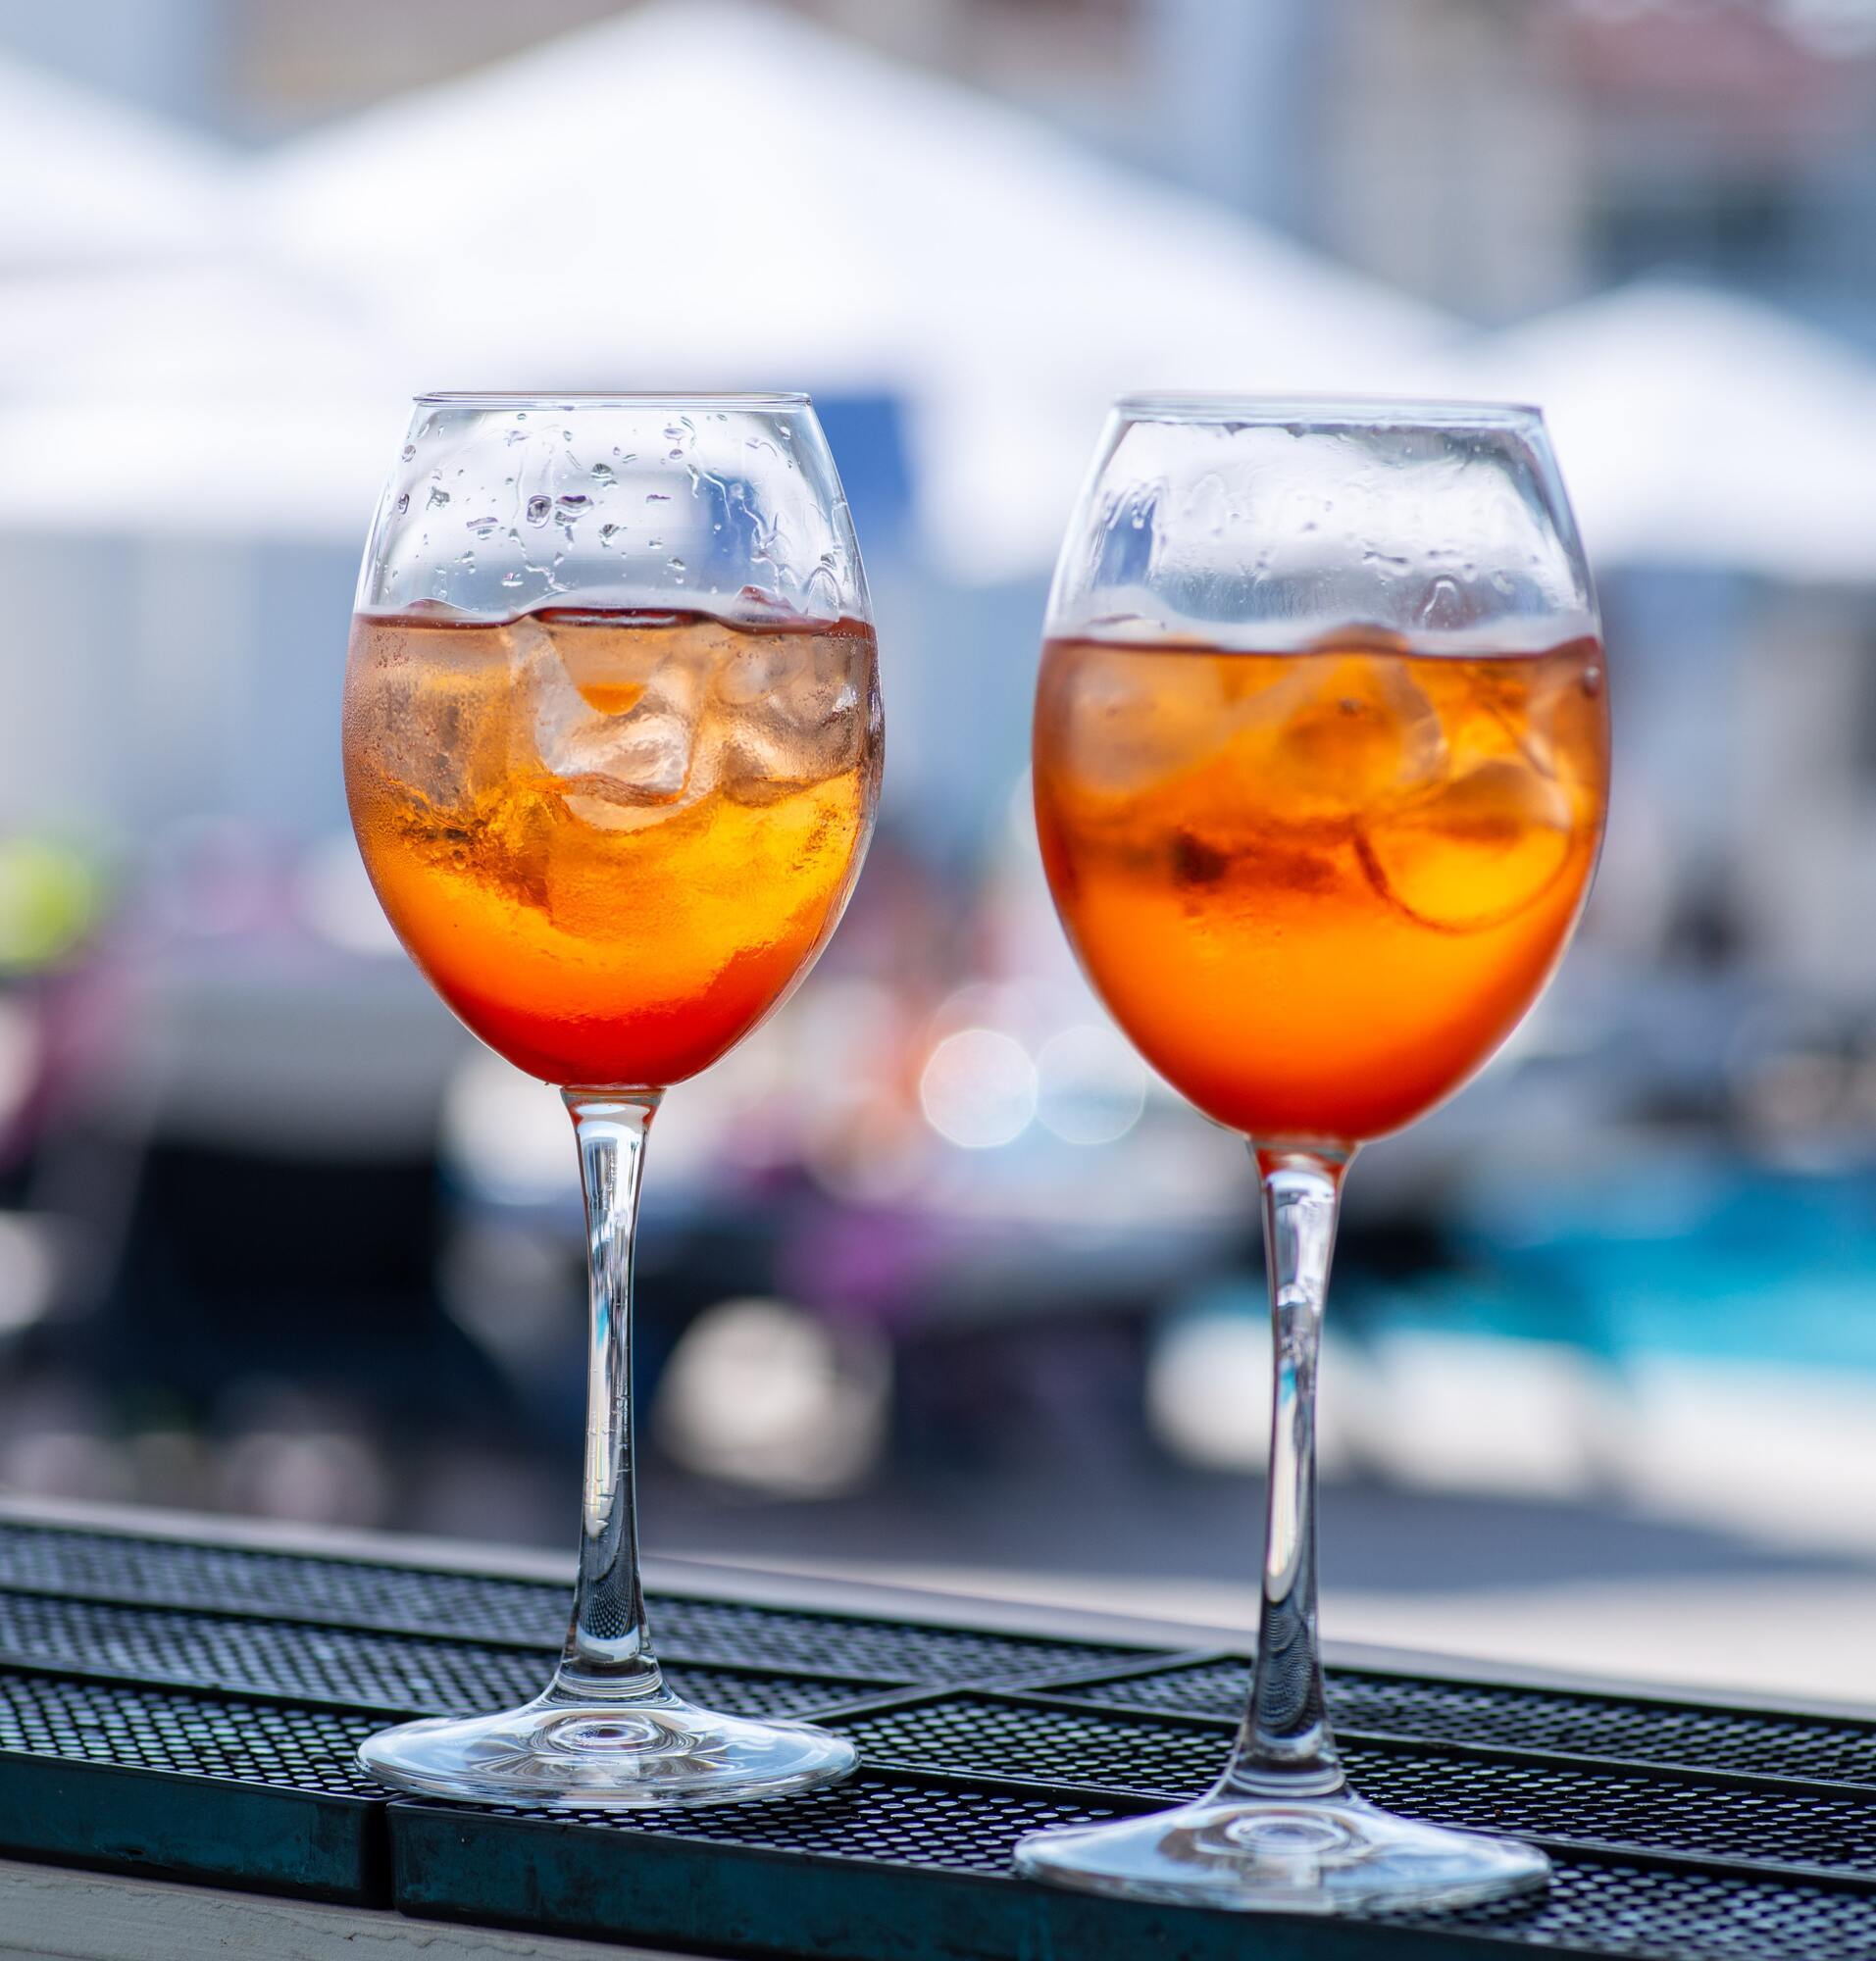 How to cook a delicious ''Aperol'' at home